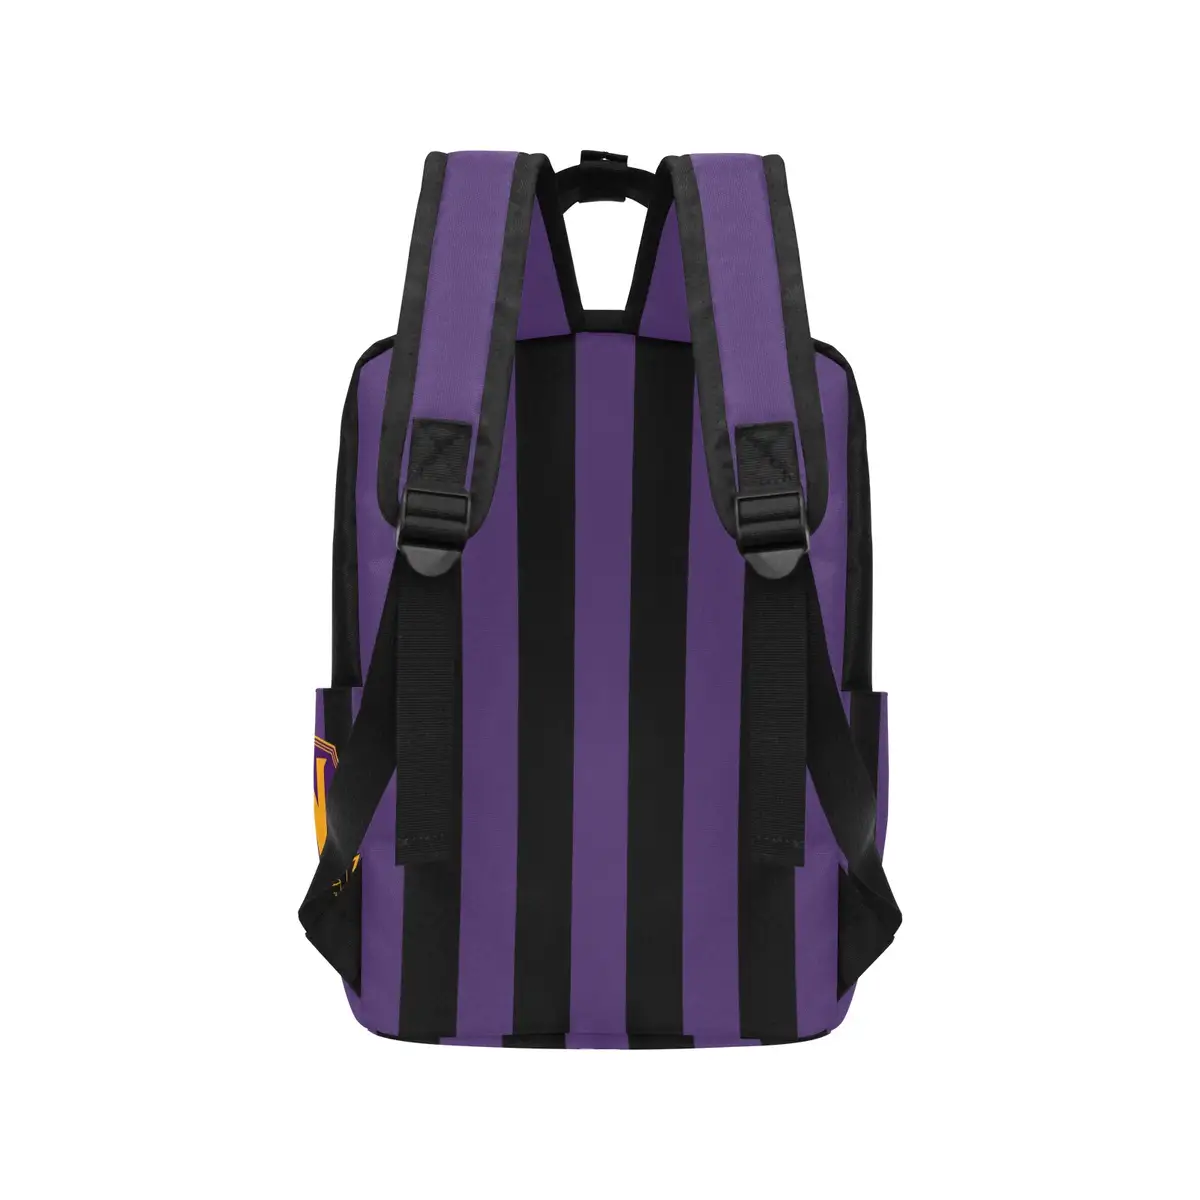 Wednesday Addams Uniform Inspired Black and Purple Backpack, Youth Book Bag for School, Nevermore Academy Rucksack Cool Kiddo 20